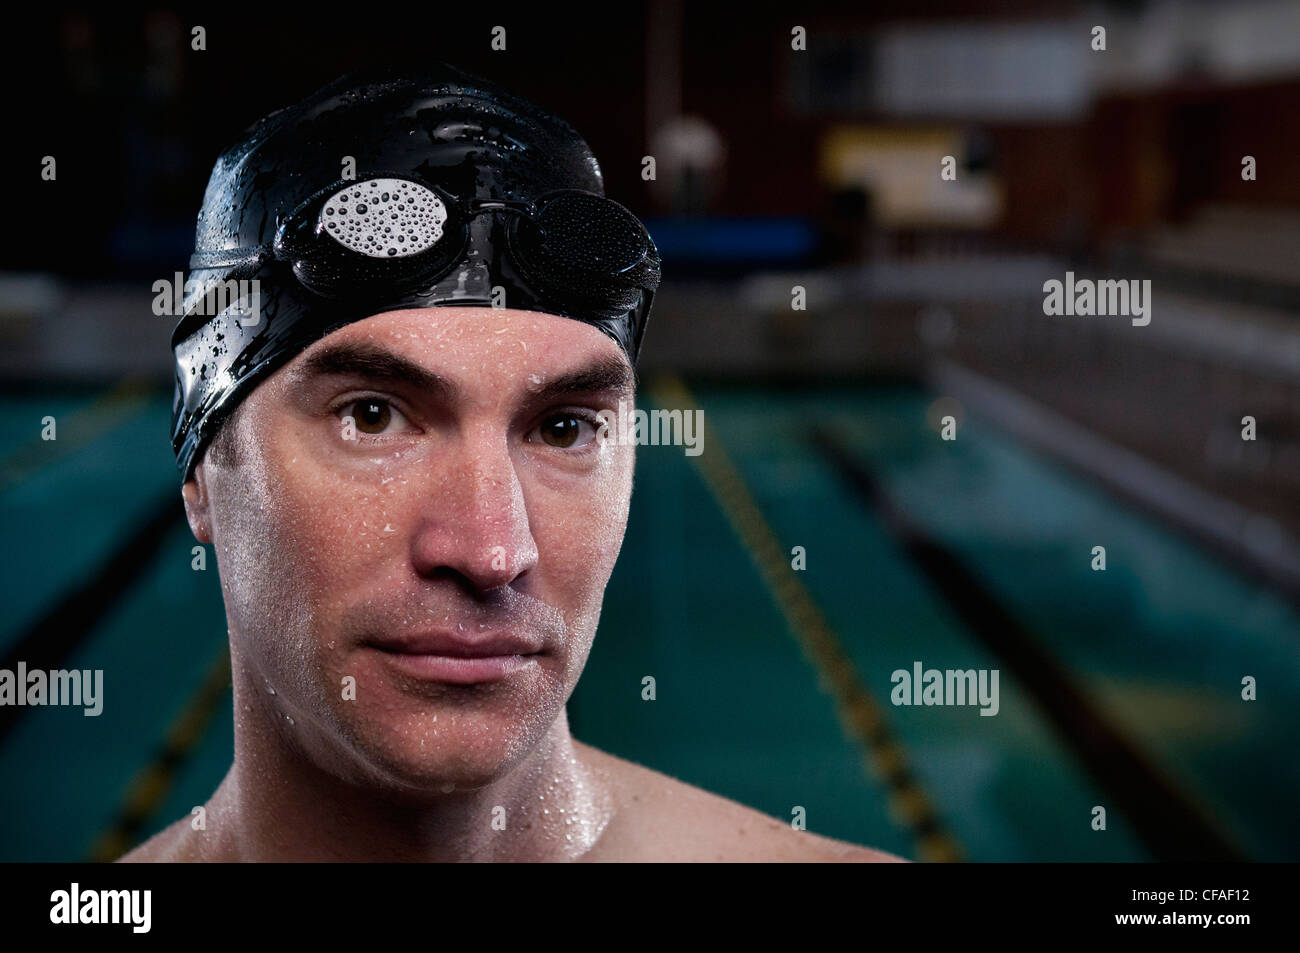 Swimmer wearing cap and goggles Stock Photo